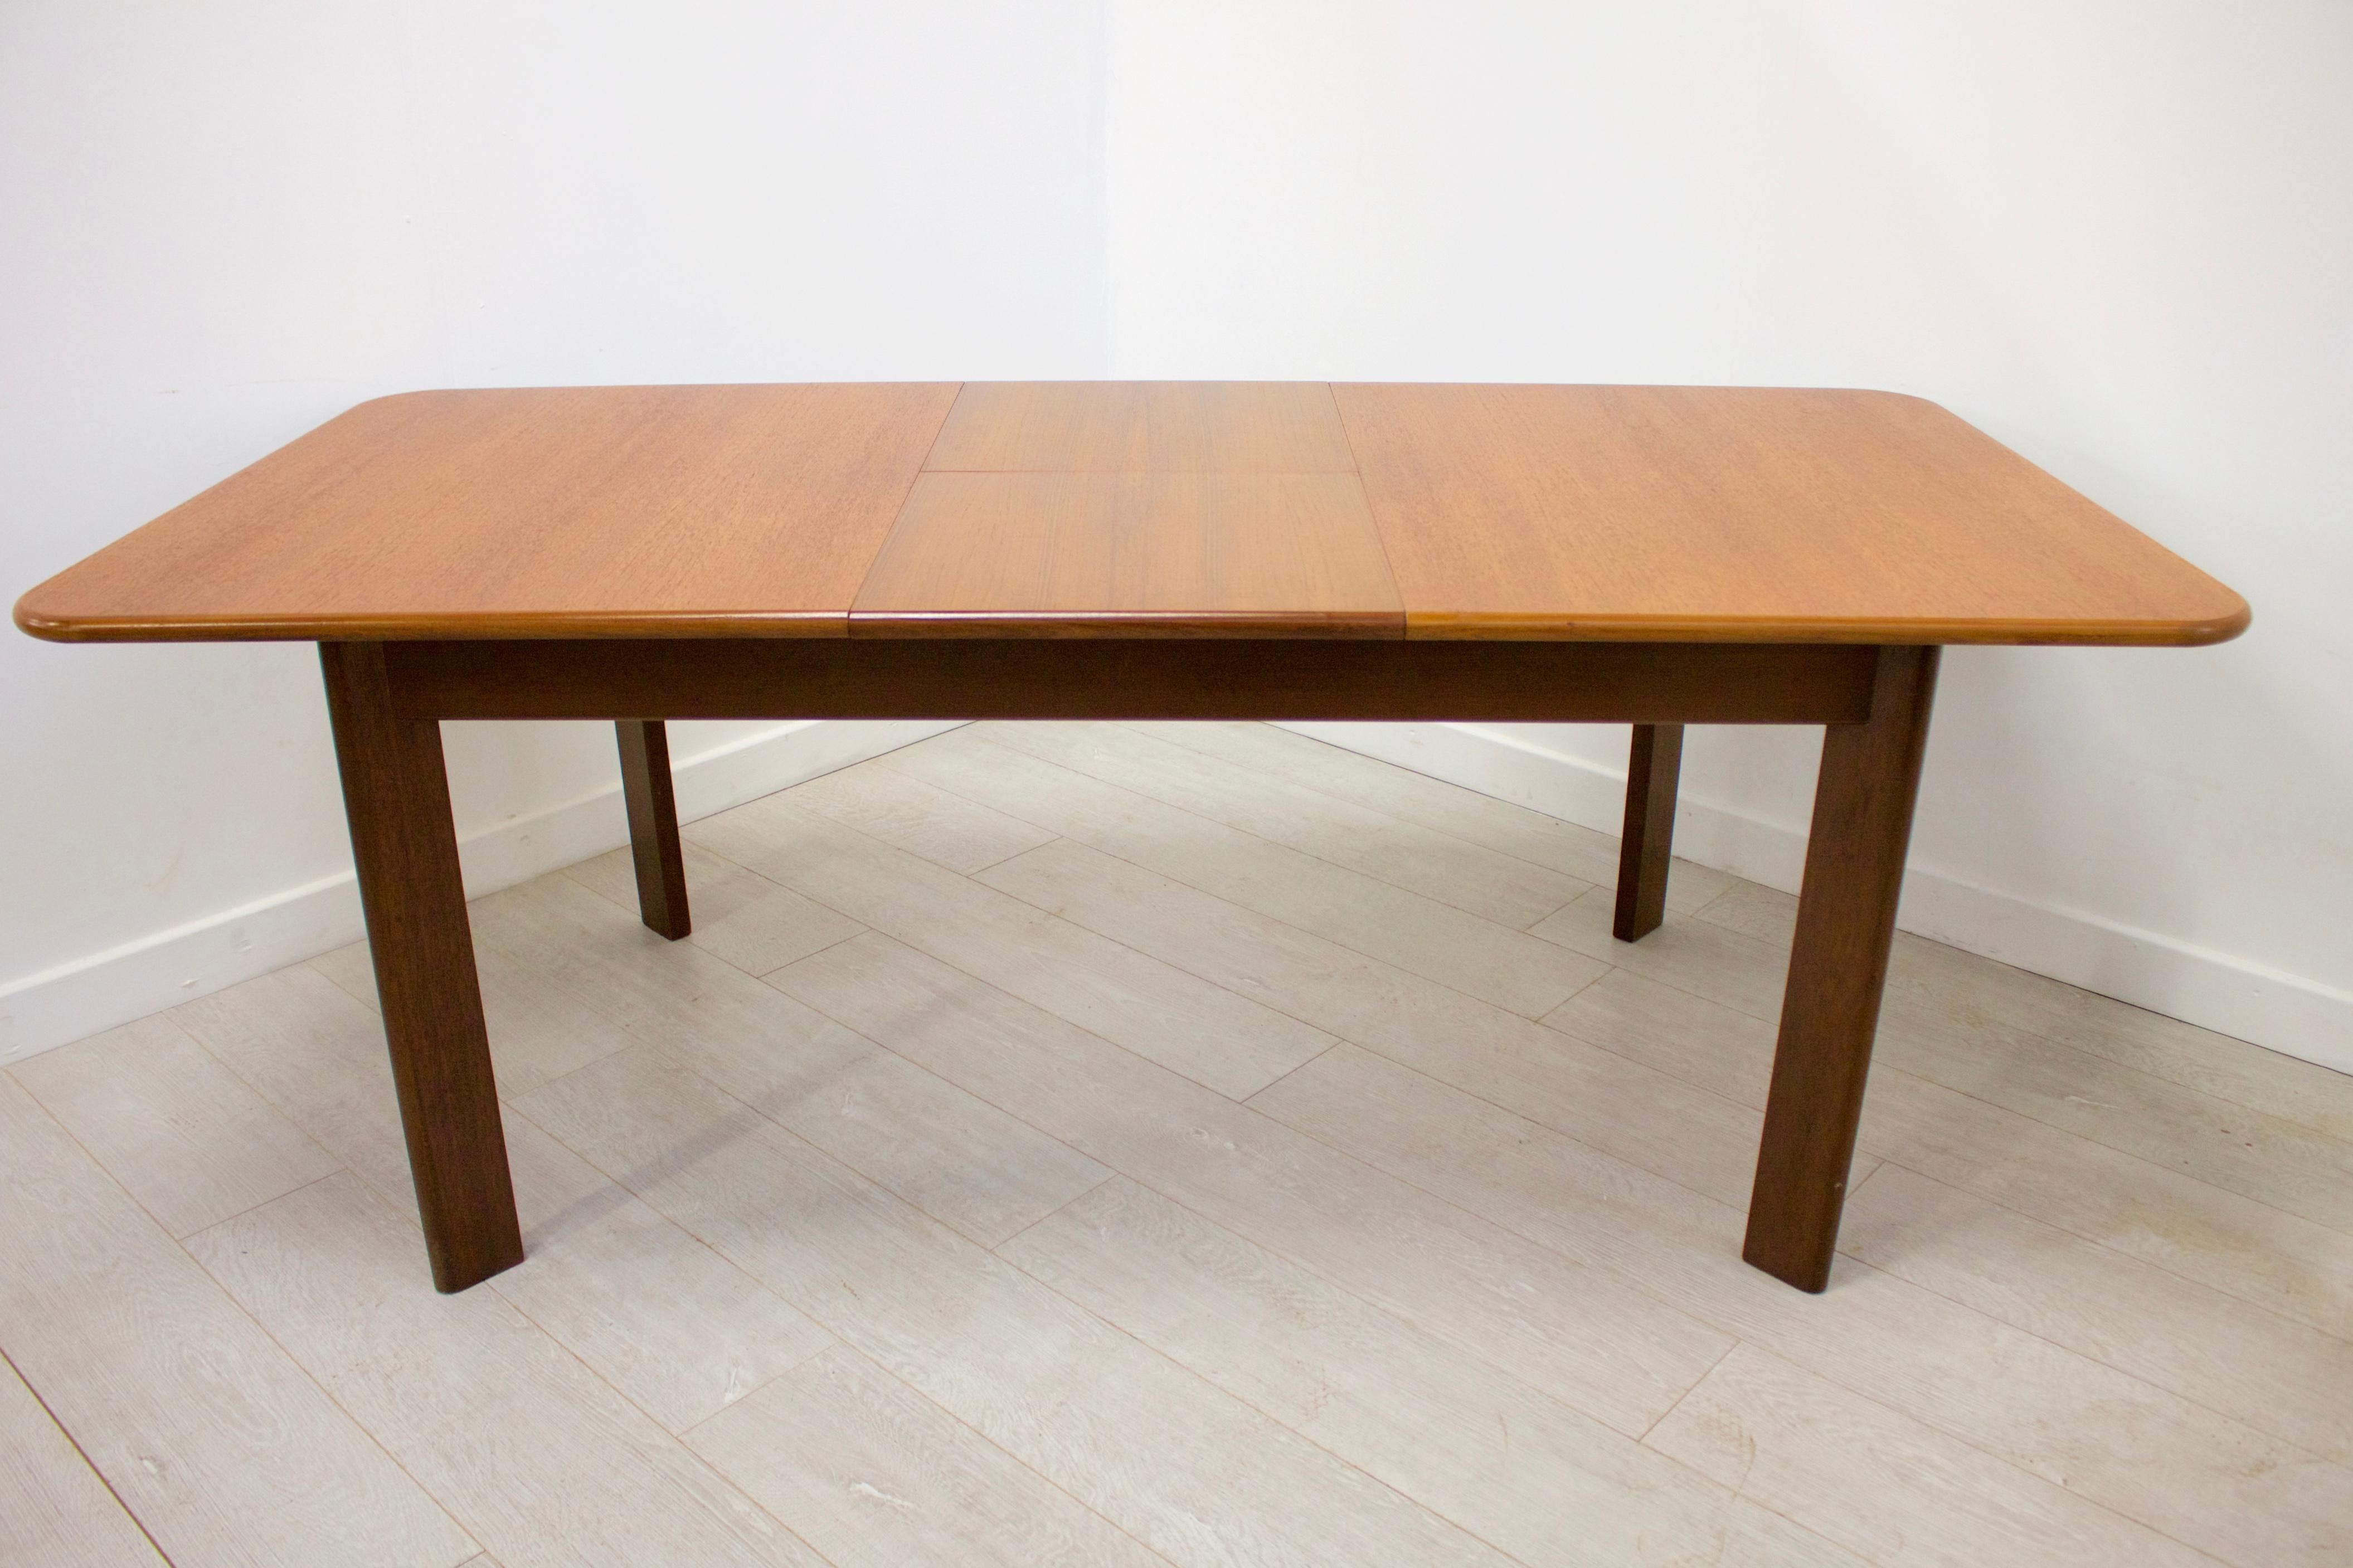 British Midcentury Teak Extending Dining Table by G-Plan, 1970s For Sale